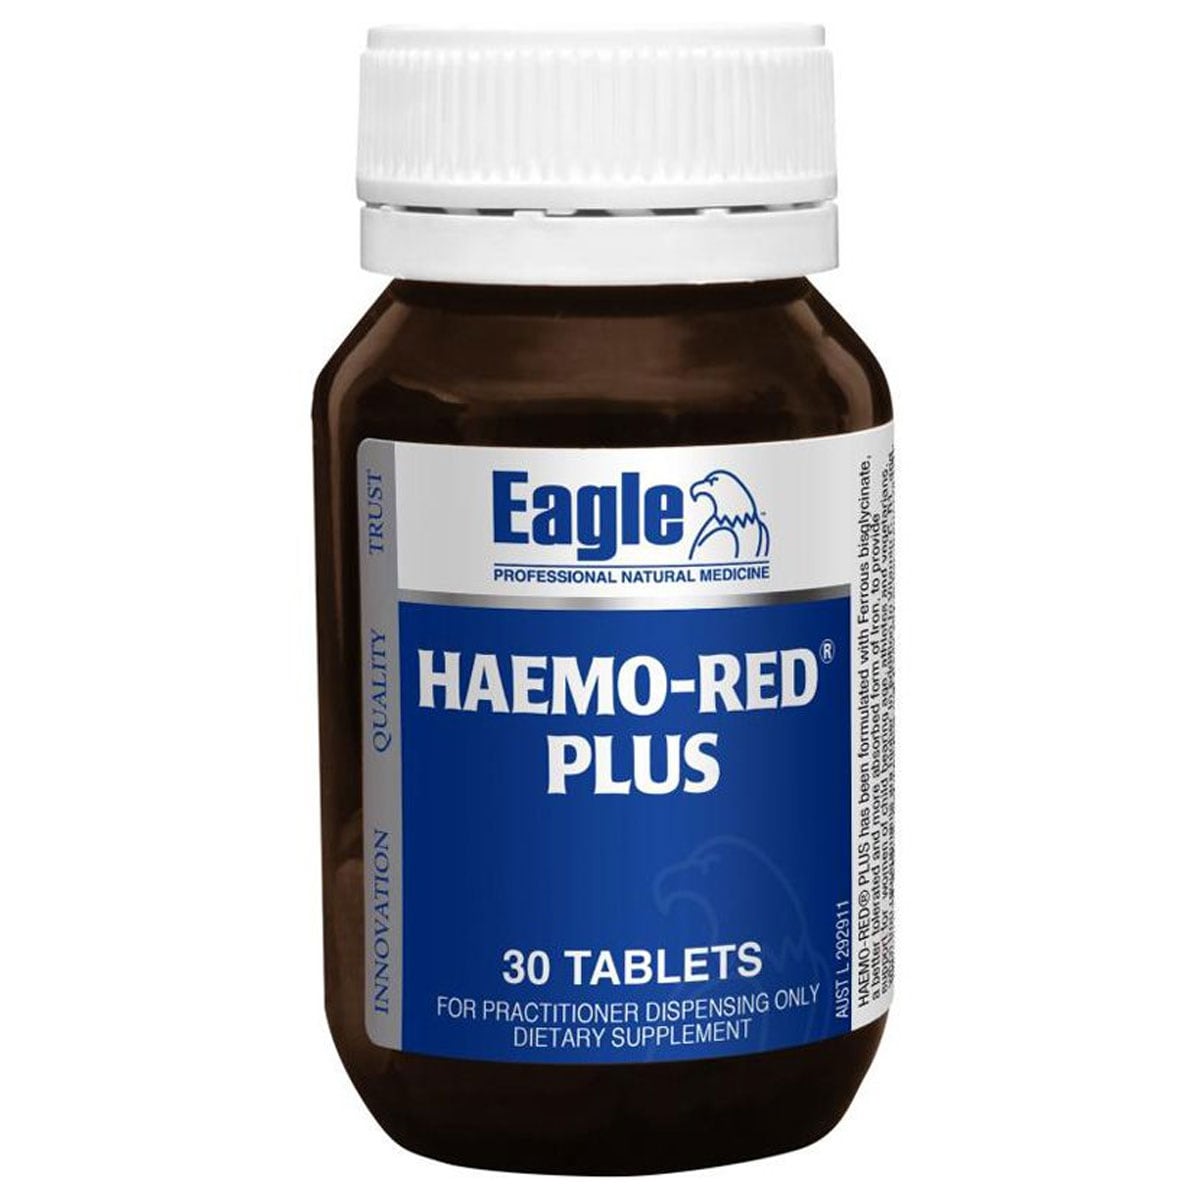 Eagle Haemo-Red Plus 30 Tablets